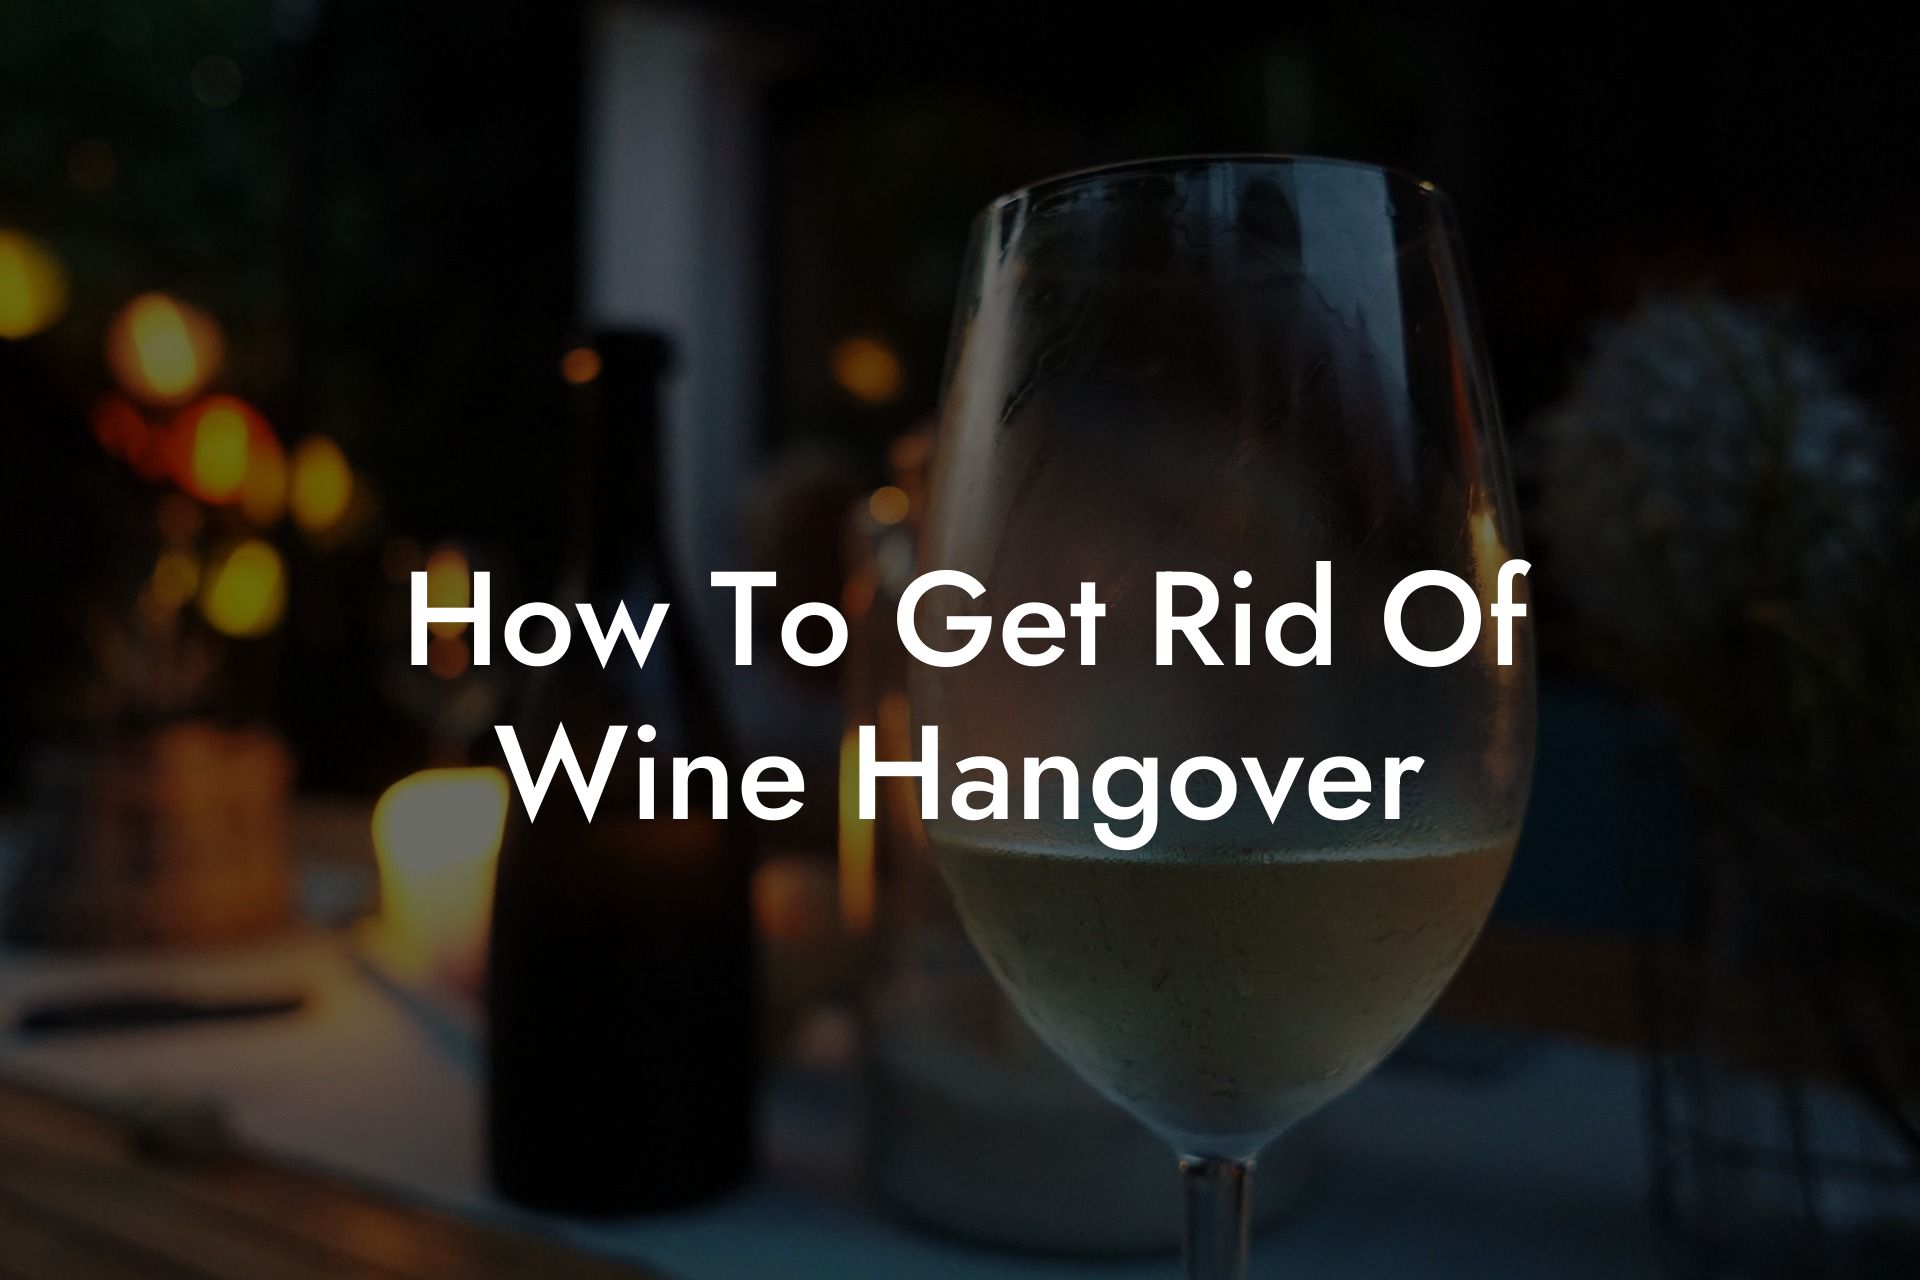 How To Get Rid Of Wine Hangover